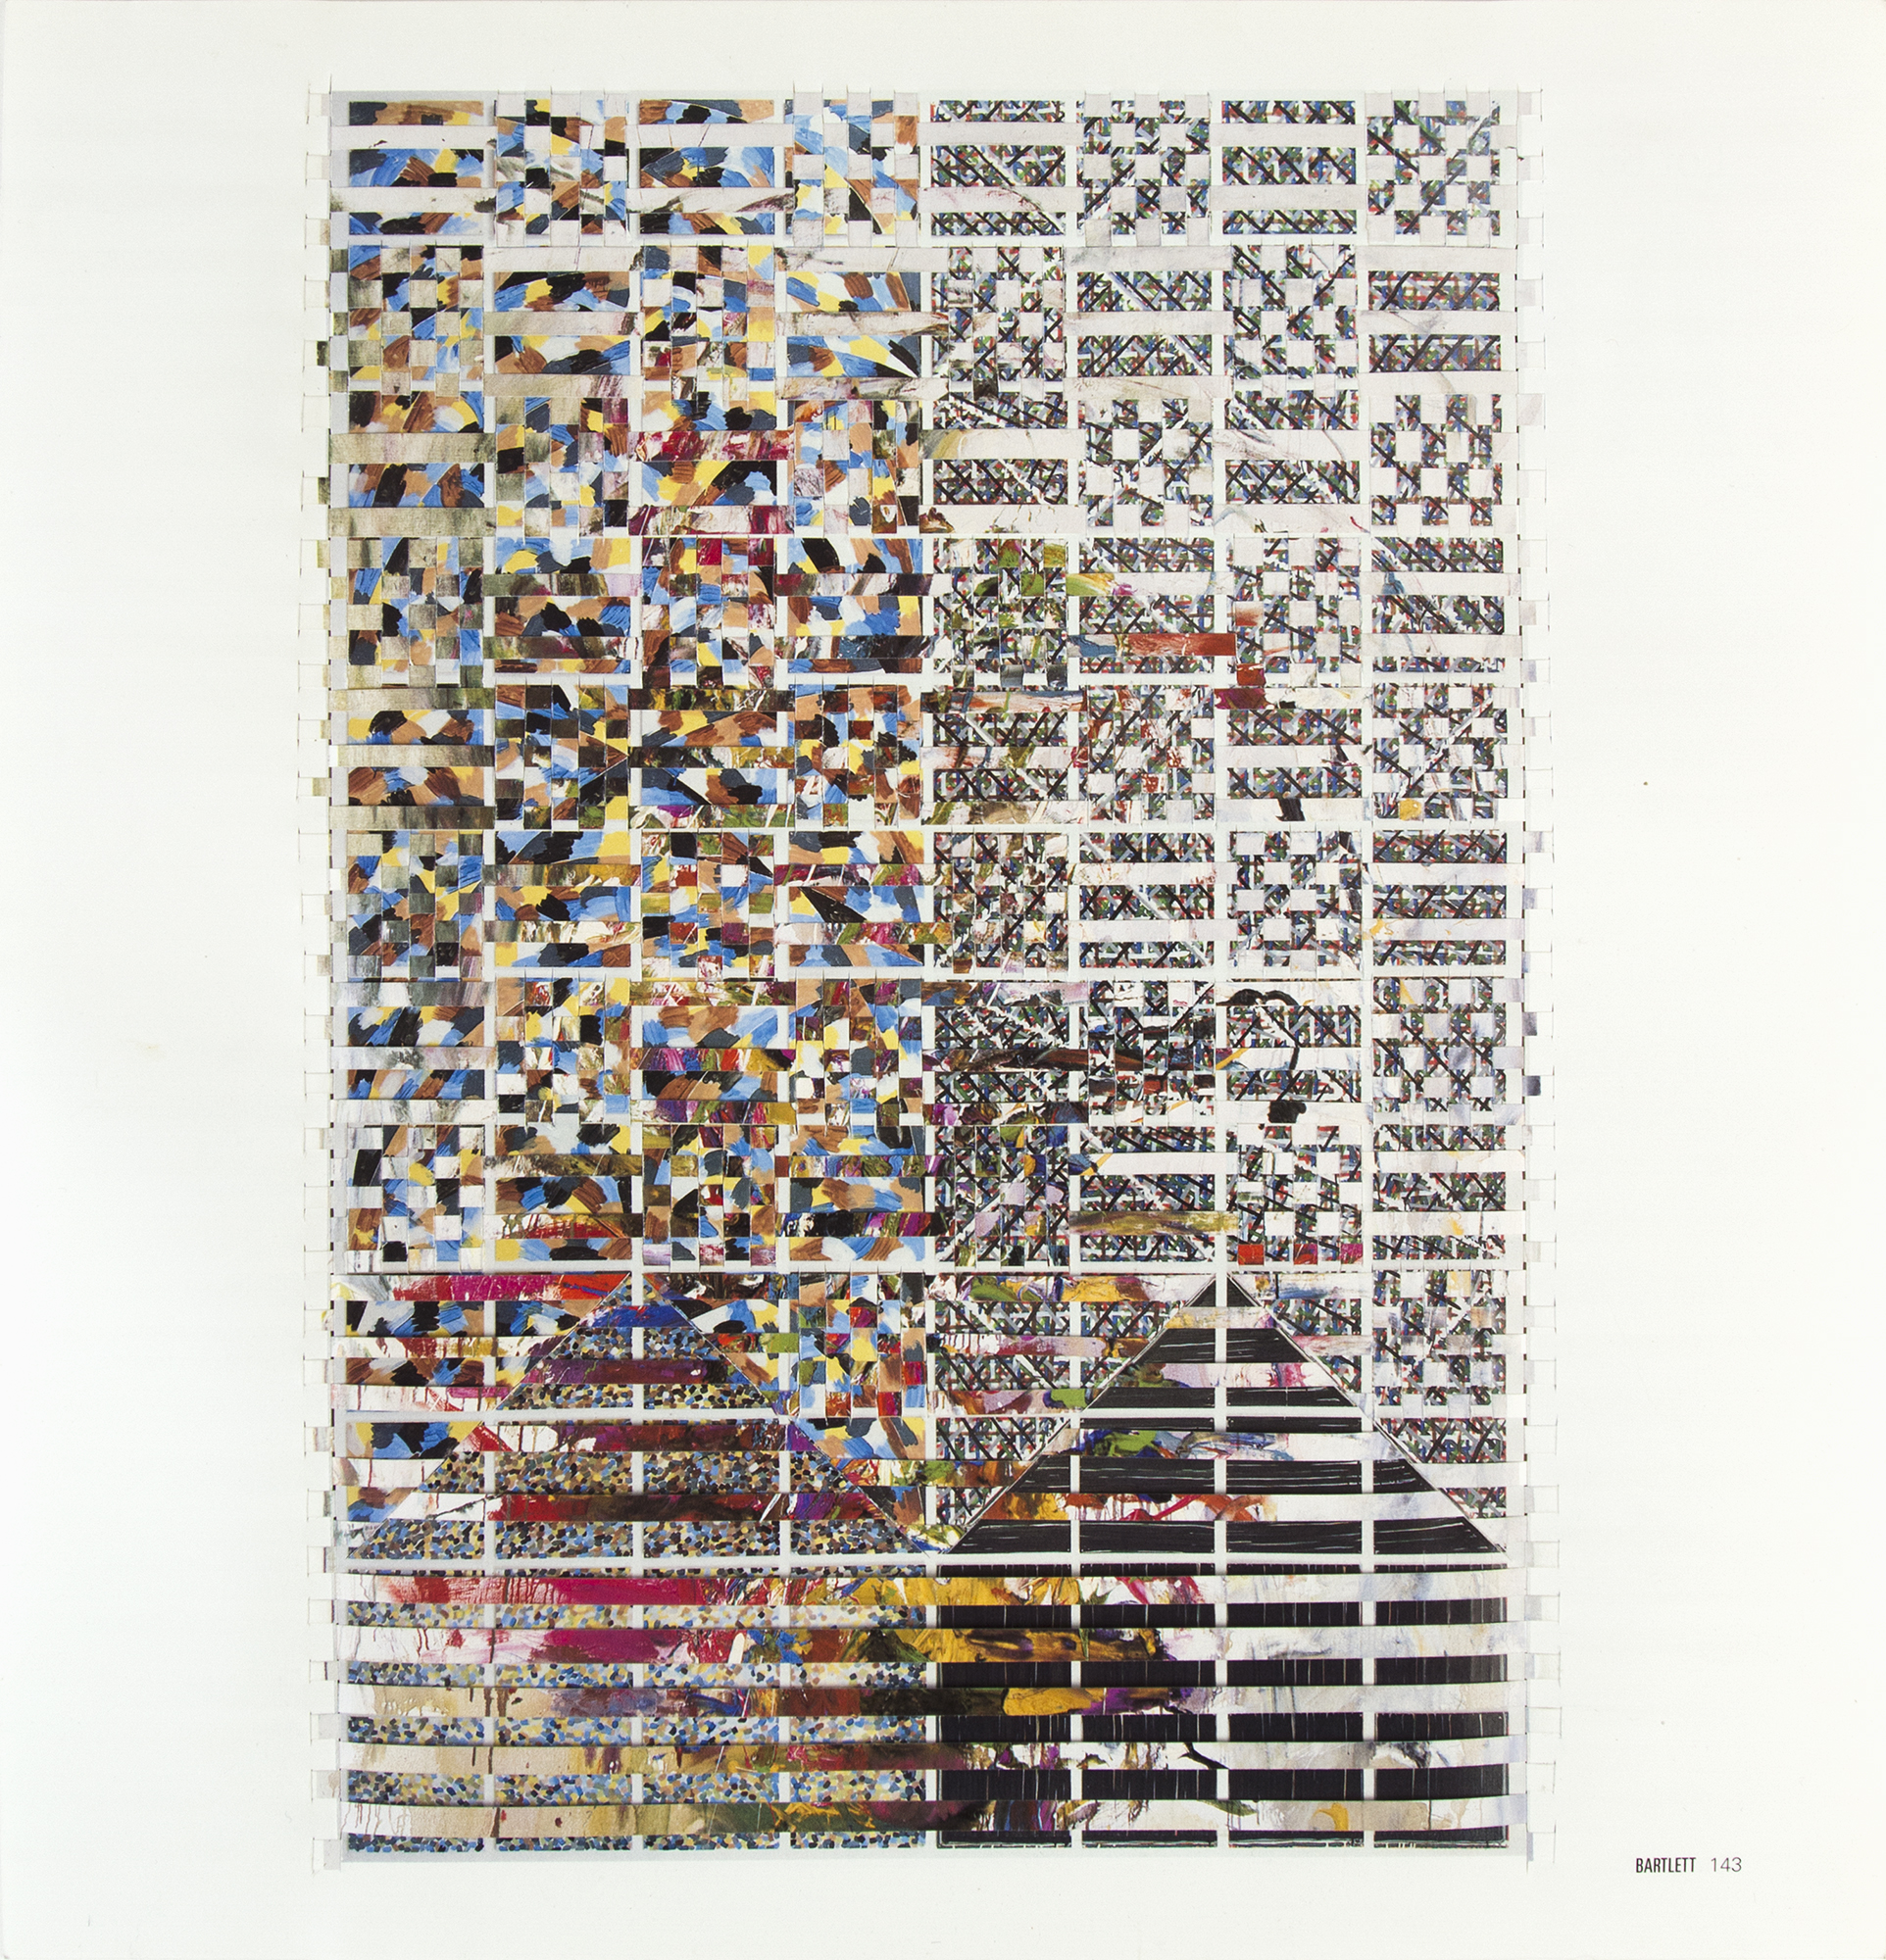 bartlettmitchell, 2014, hand-woven art auction catalog pages, 10.25 x 10.75